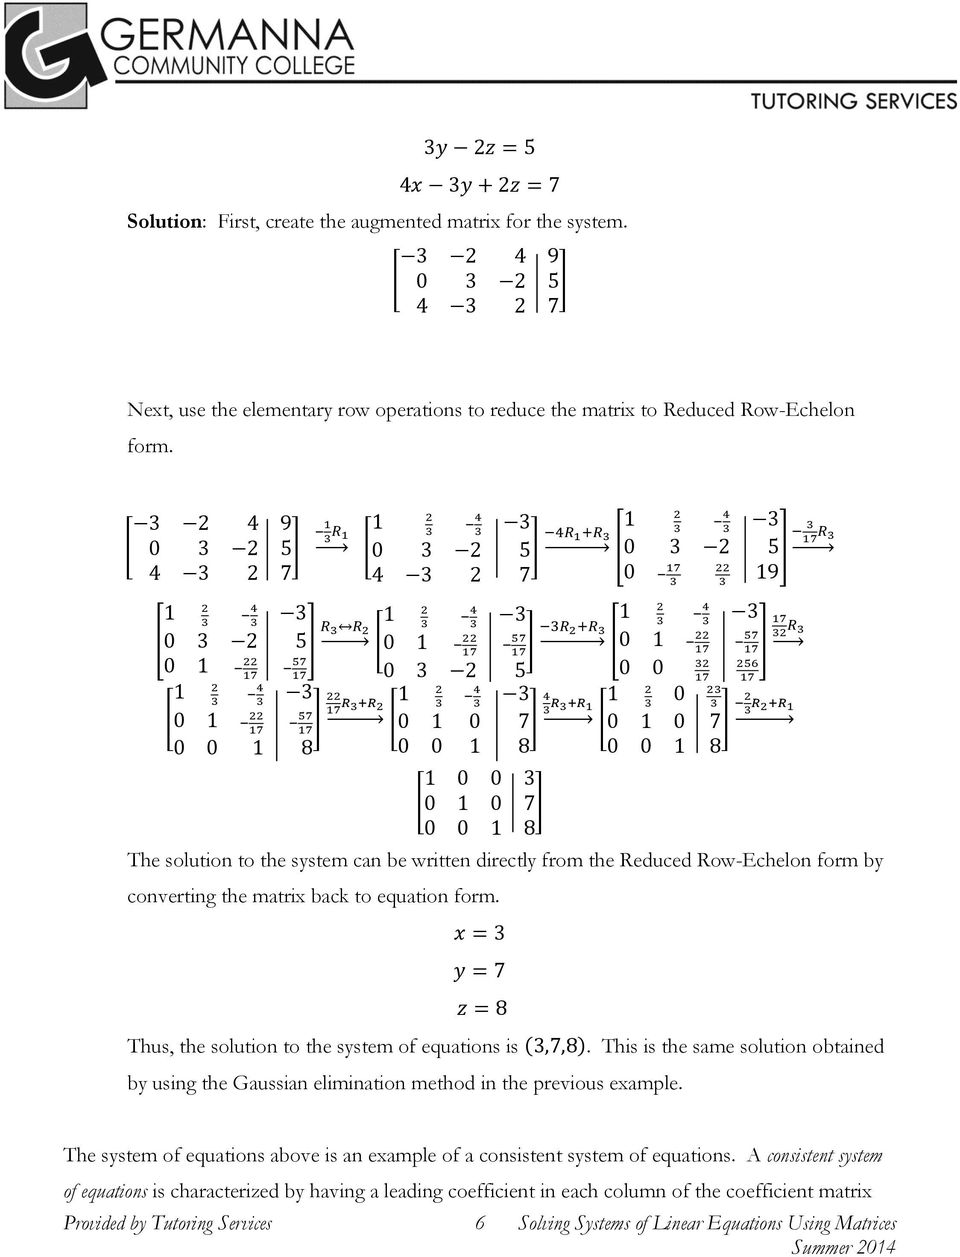 7] 0 0 1 8 0 0 1 8 0 0 1 8 1 0 0 3 [ 0 1 0 7] 0 0 1 8 ] 3 R 3 3 R 3 3 R +R1 The solution to the system can be written directly from the Reduced Row-Echelon form by converting the matrix back to